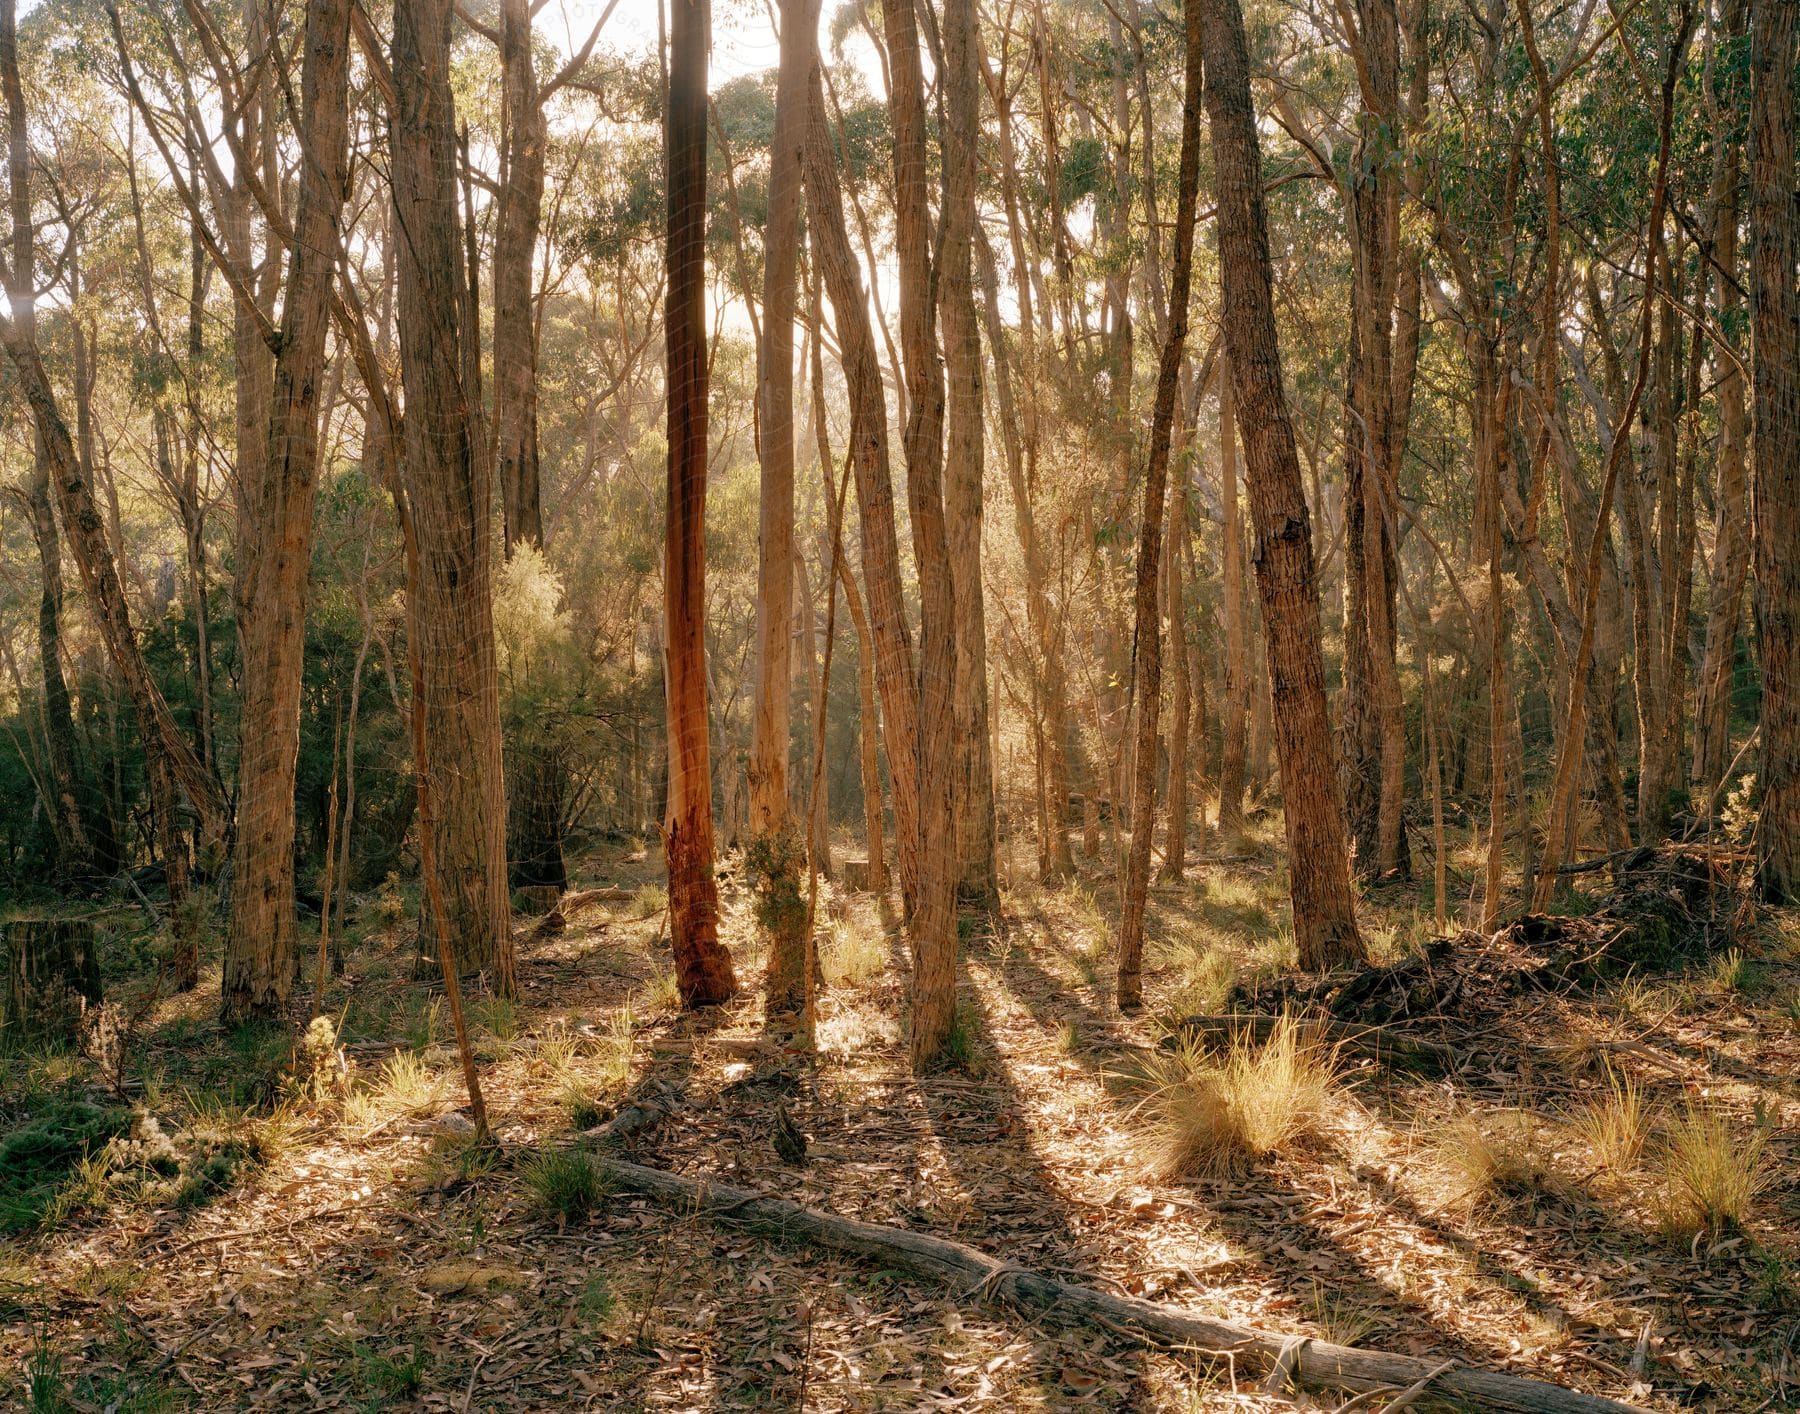 Sunlight filters through trees in a forest with fallen trees and branches on the ground